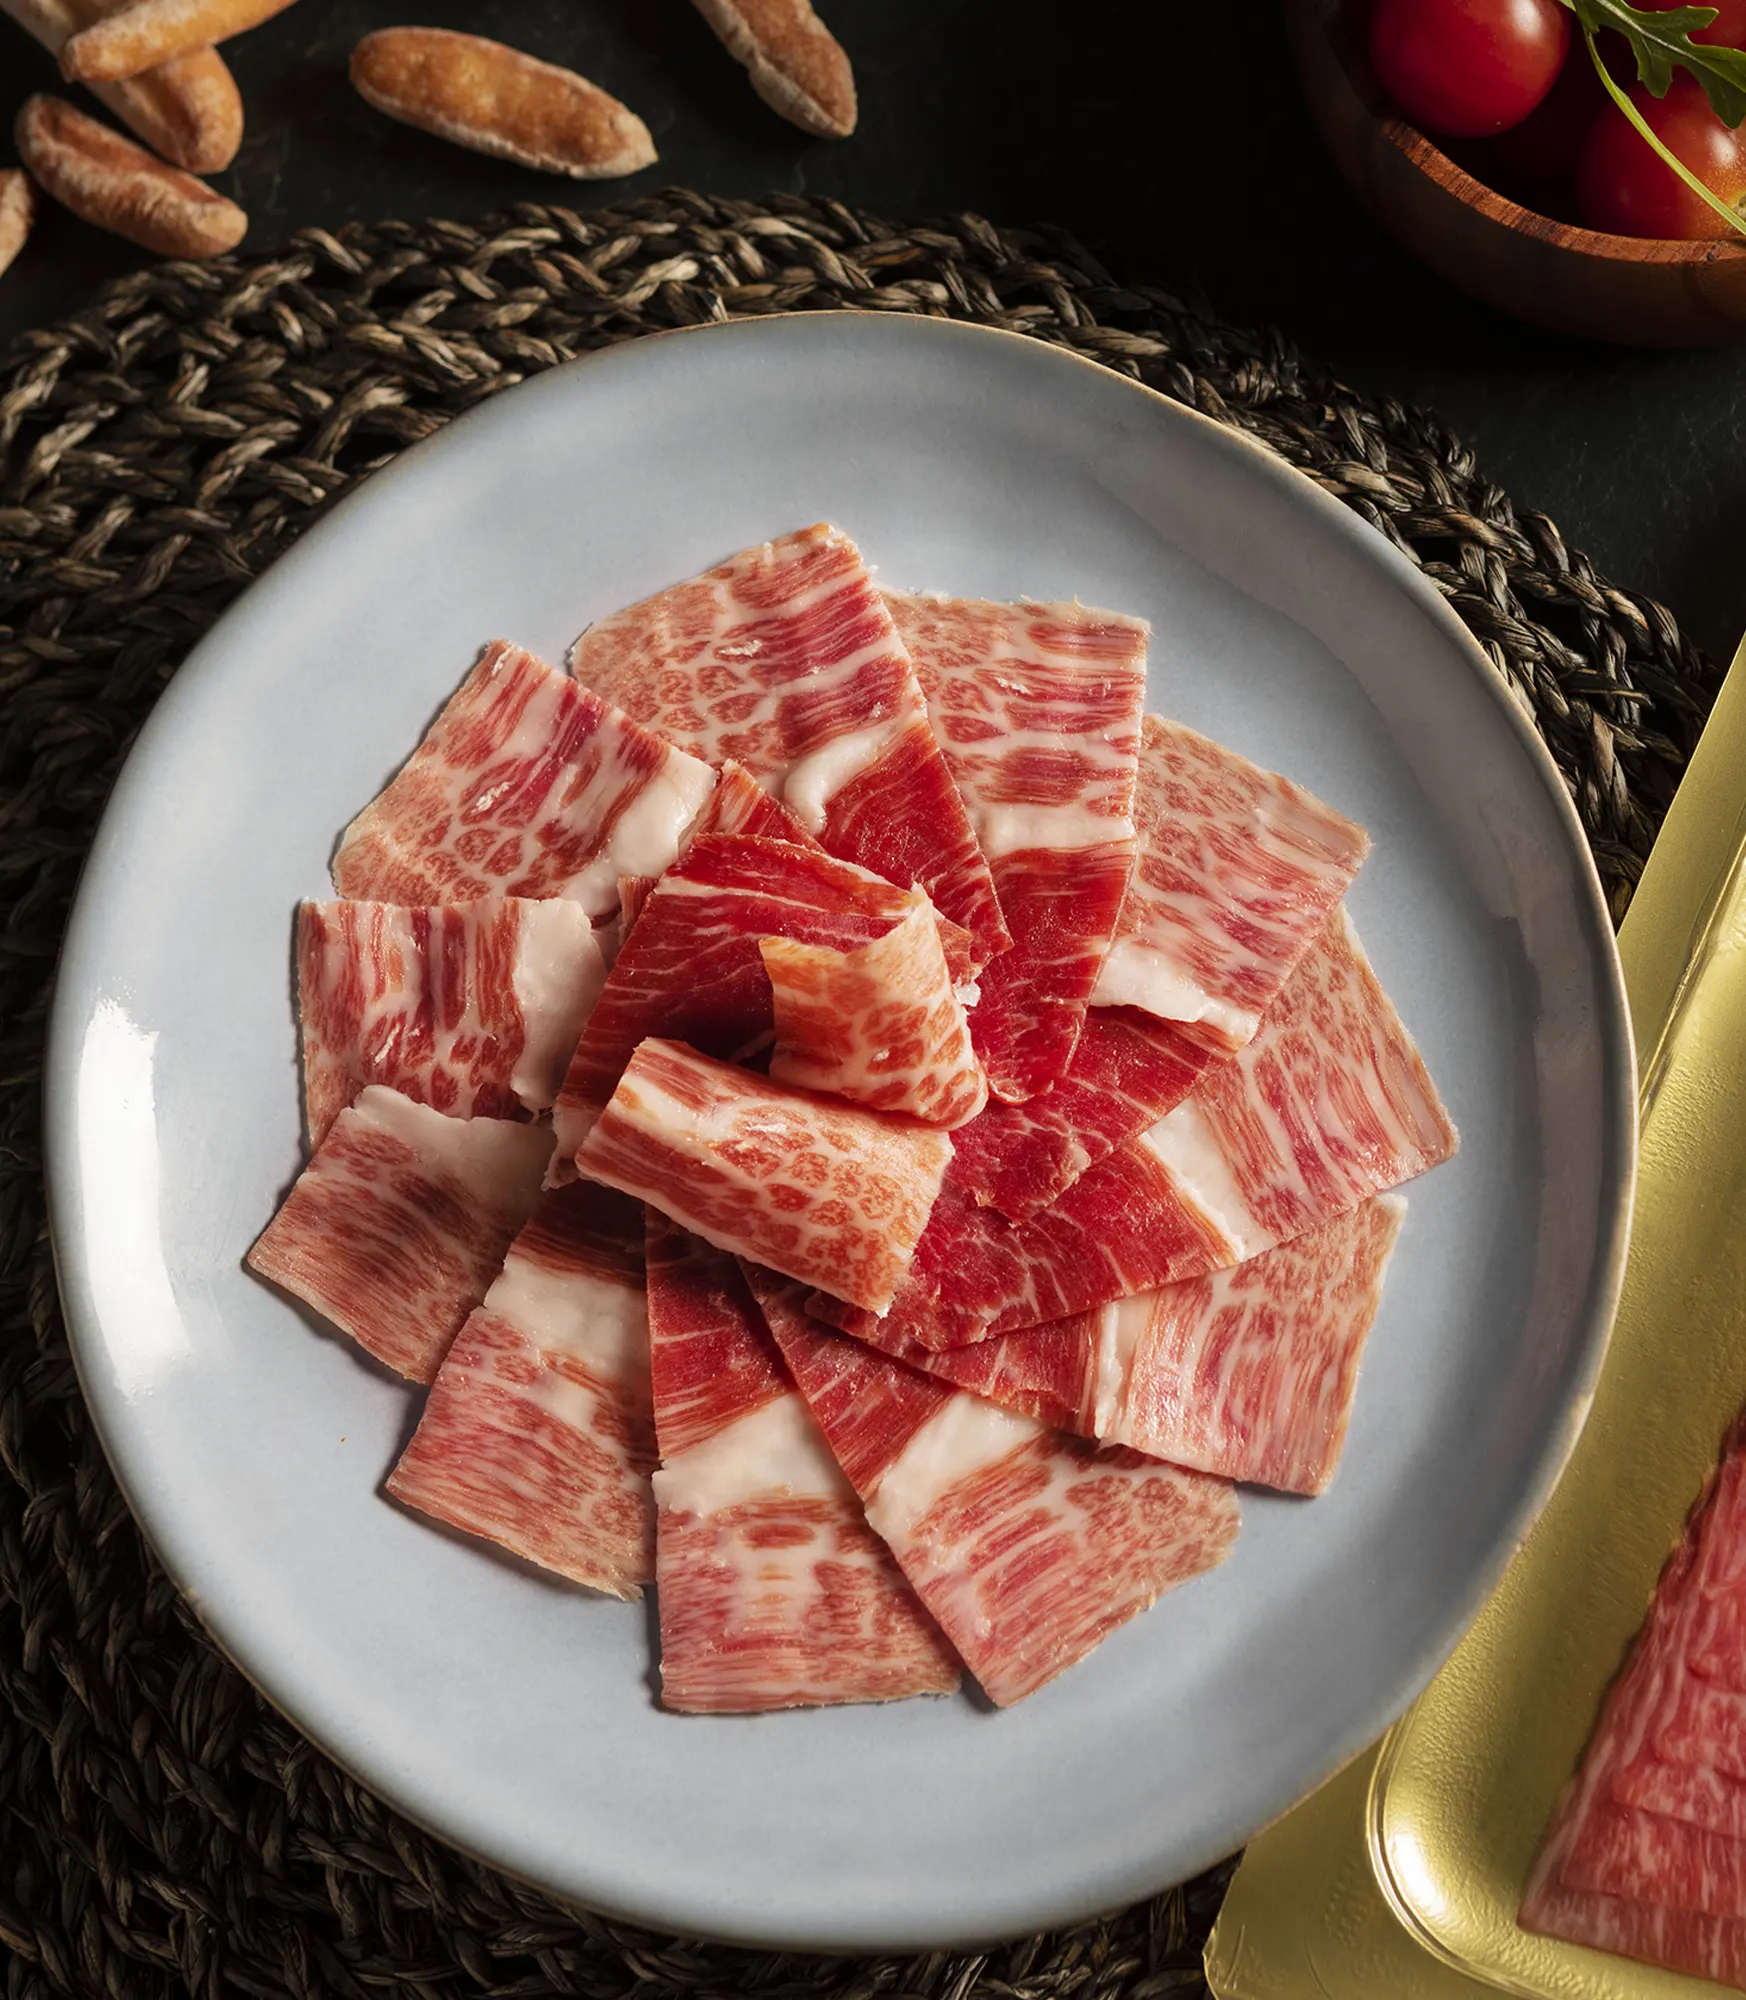 Fermín Iberico a Cut Above Marbled of Meat Instead of Fat?